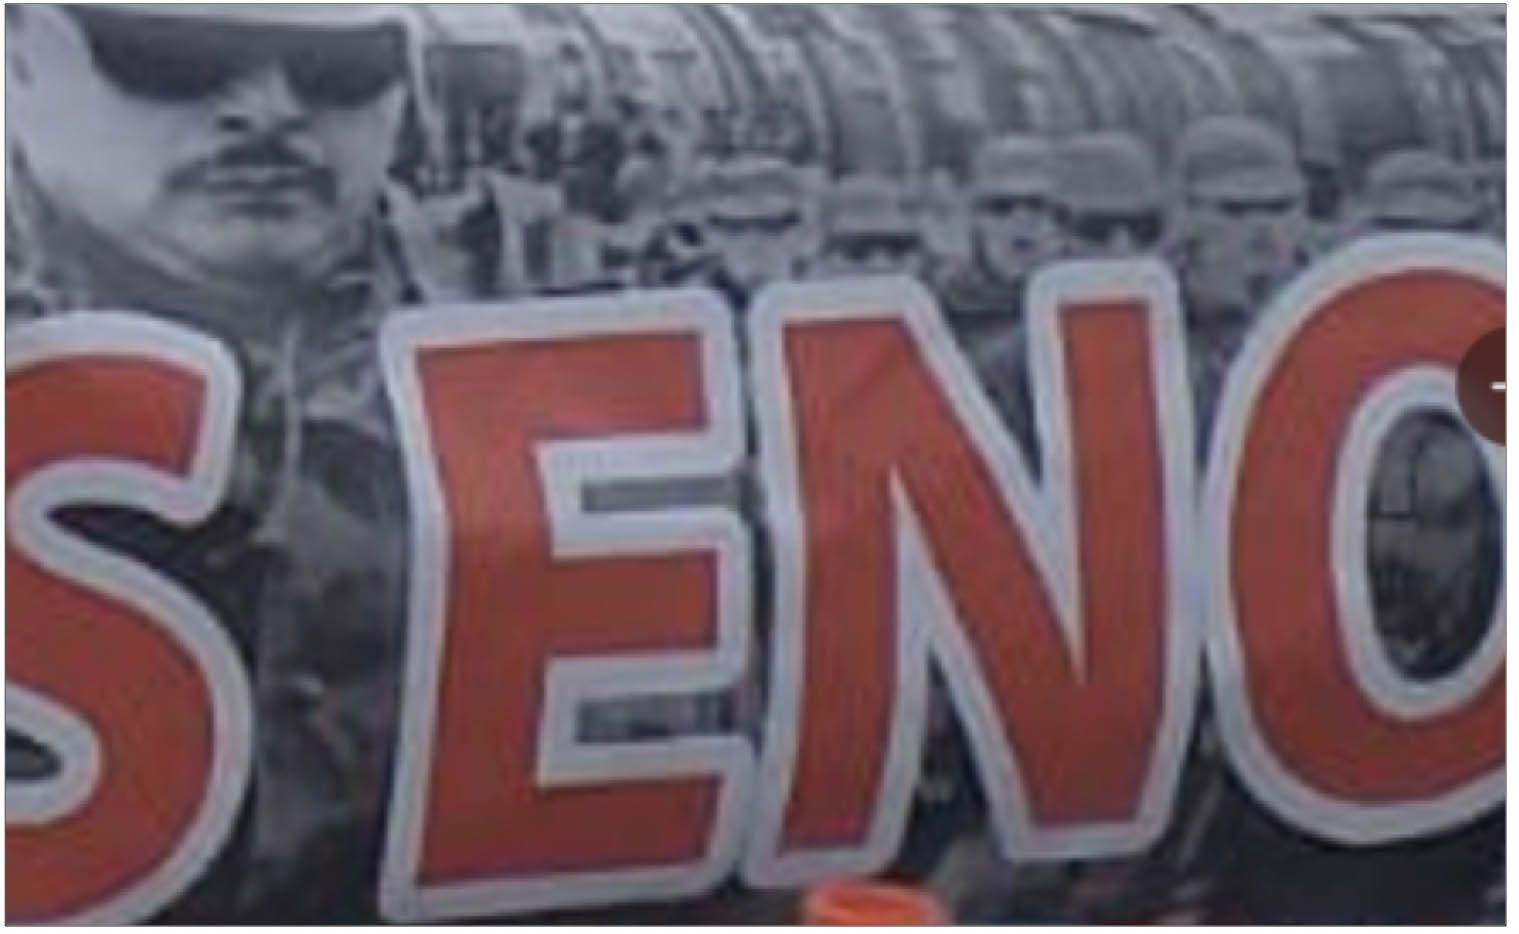 IMAGE: The 1970s UDA featured on the banner